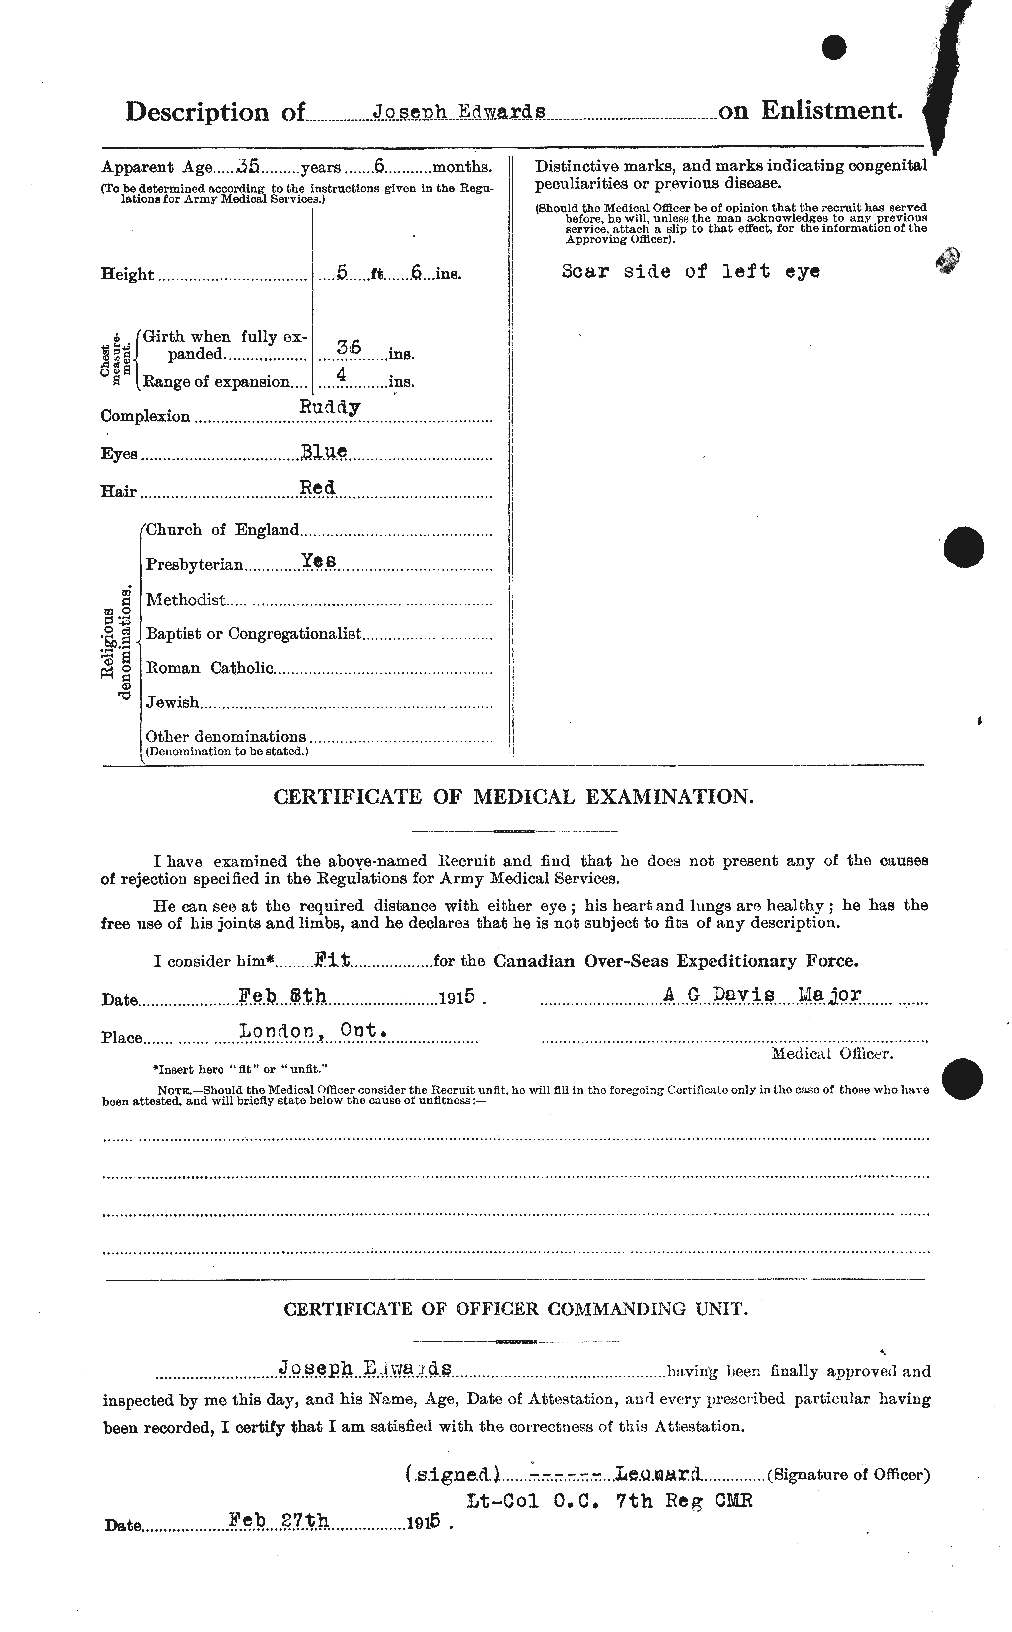 Personnel Records of the First World War - CEF 310177b